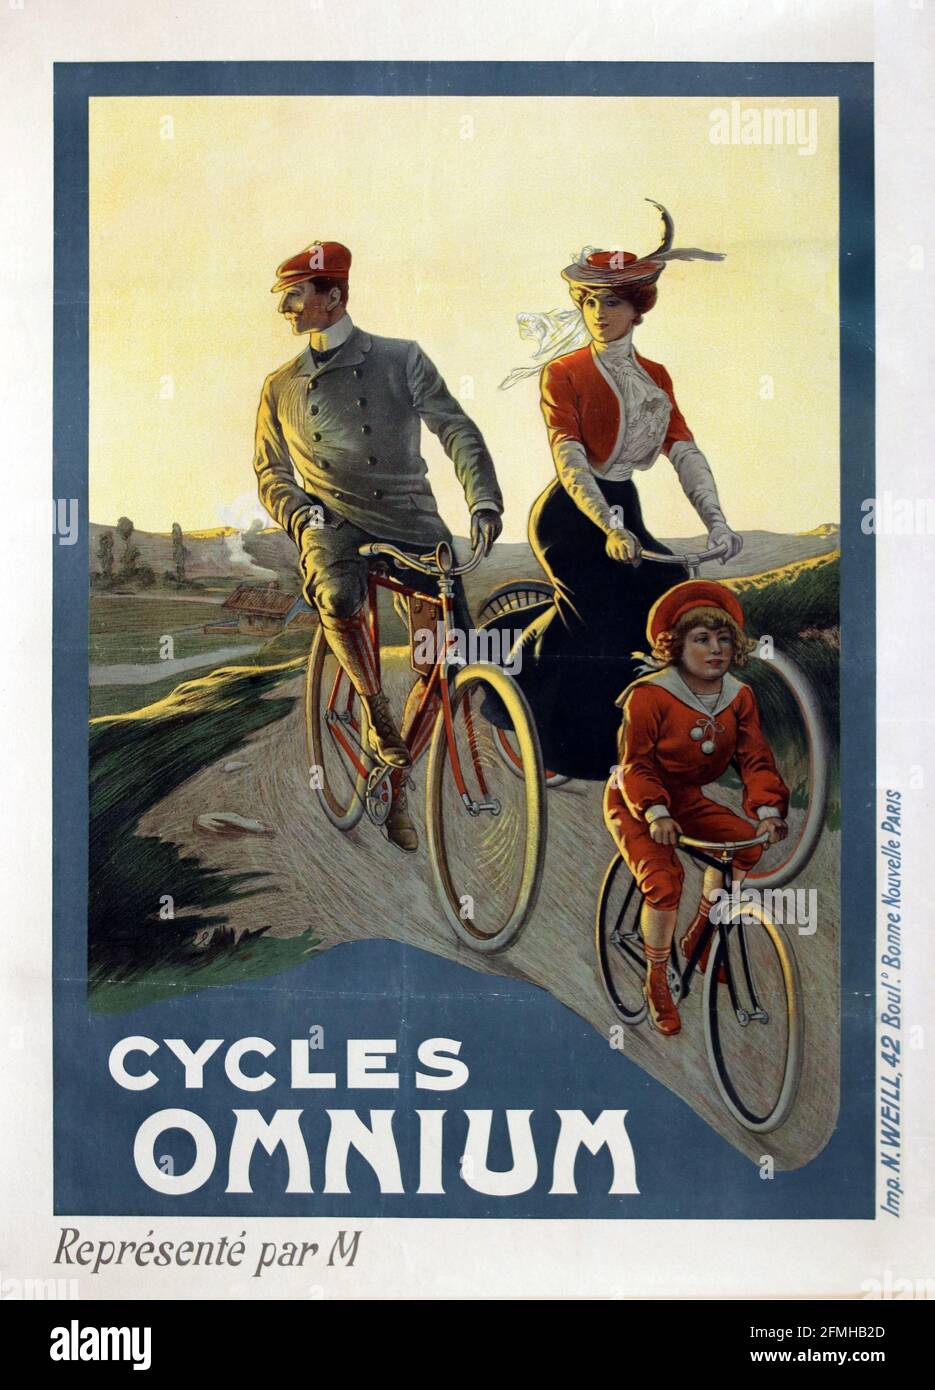 Cycles Omnium. 1896. Bicycle advertisement poster. Old and vintage. Digitally enhanced. Stock Photo